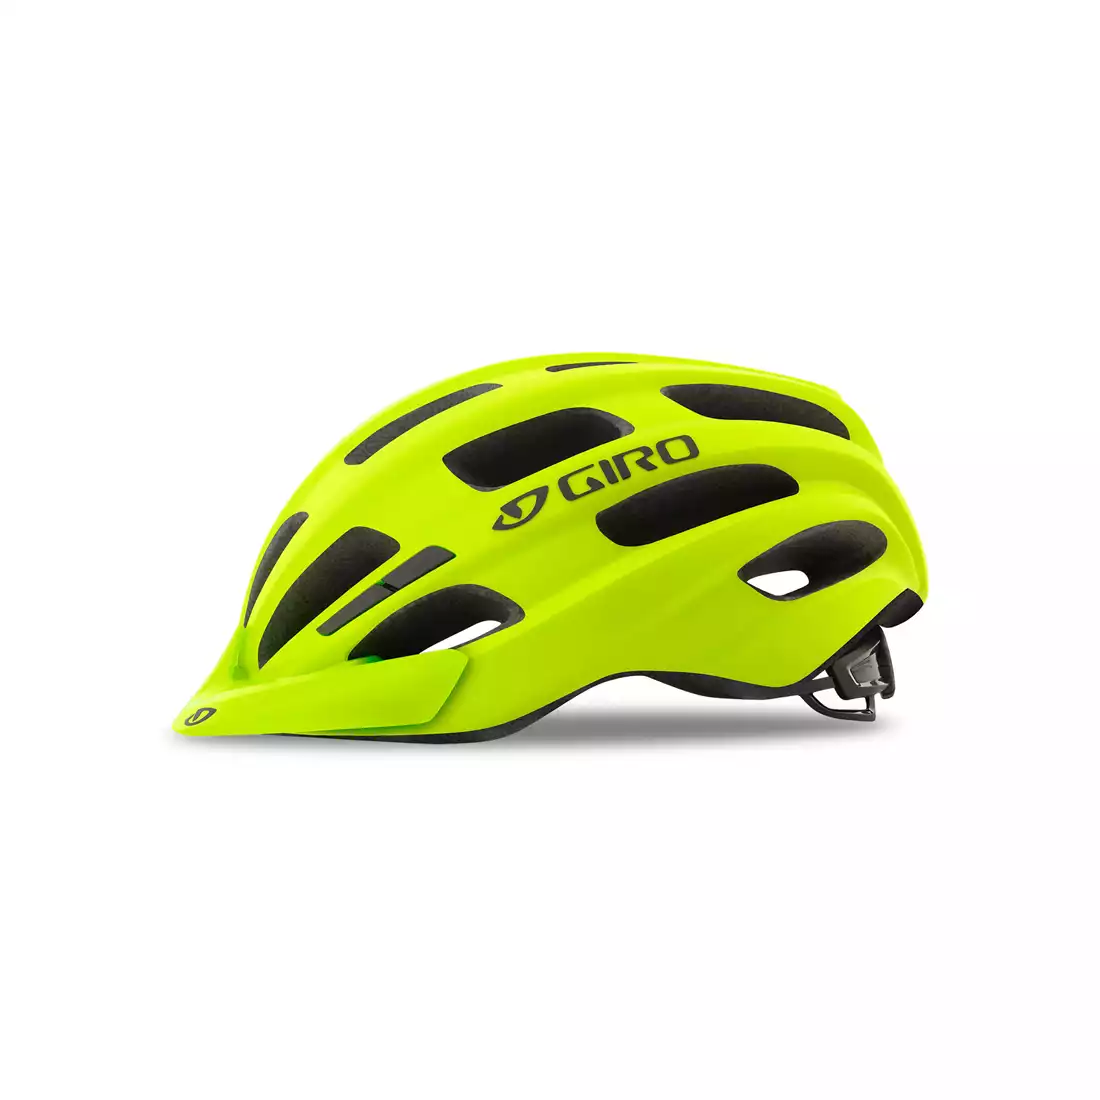 GIRO kask rowerowy mtb REGISTER INTEGRATED MIPS highlight yellow GR-7095261 